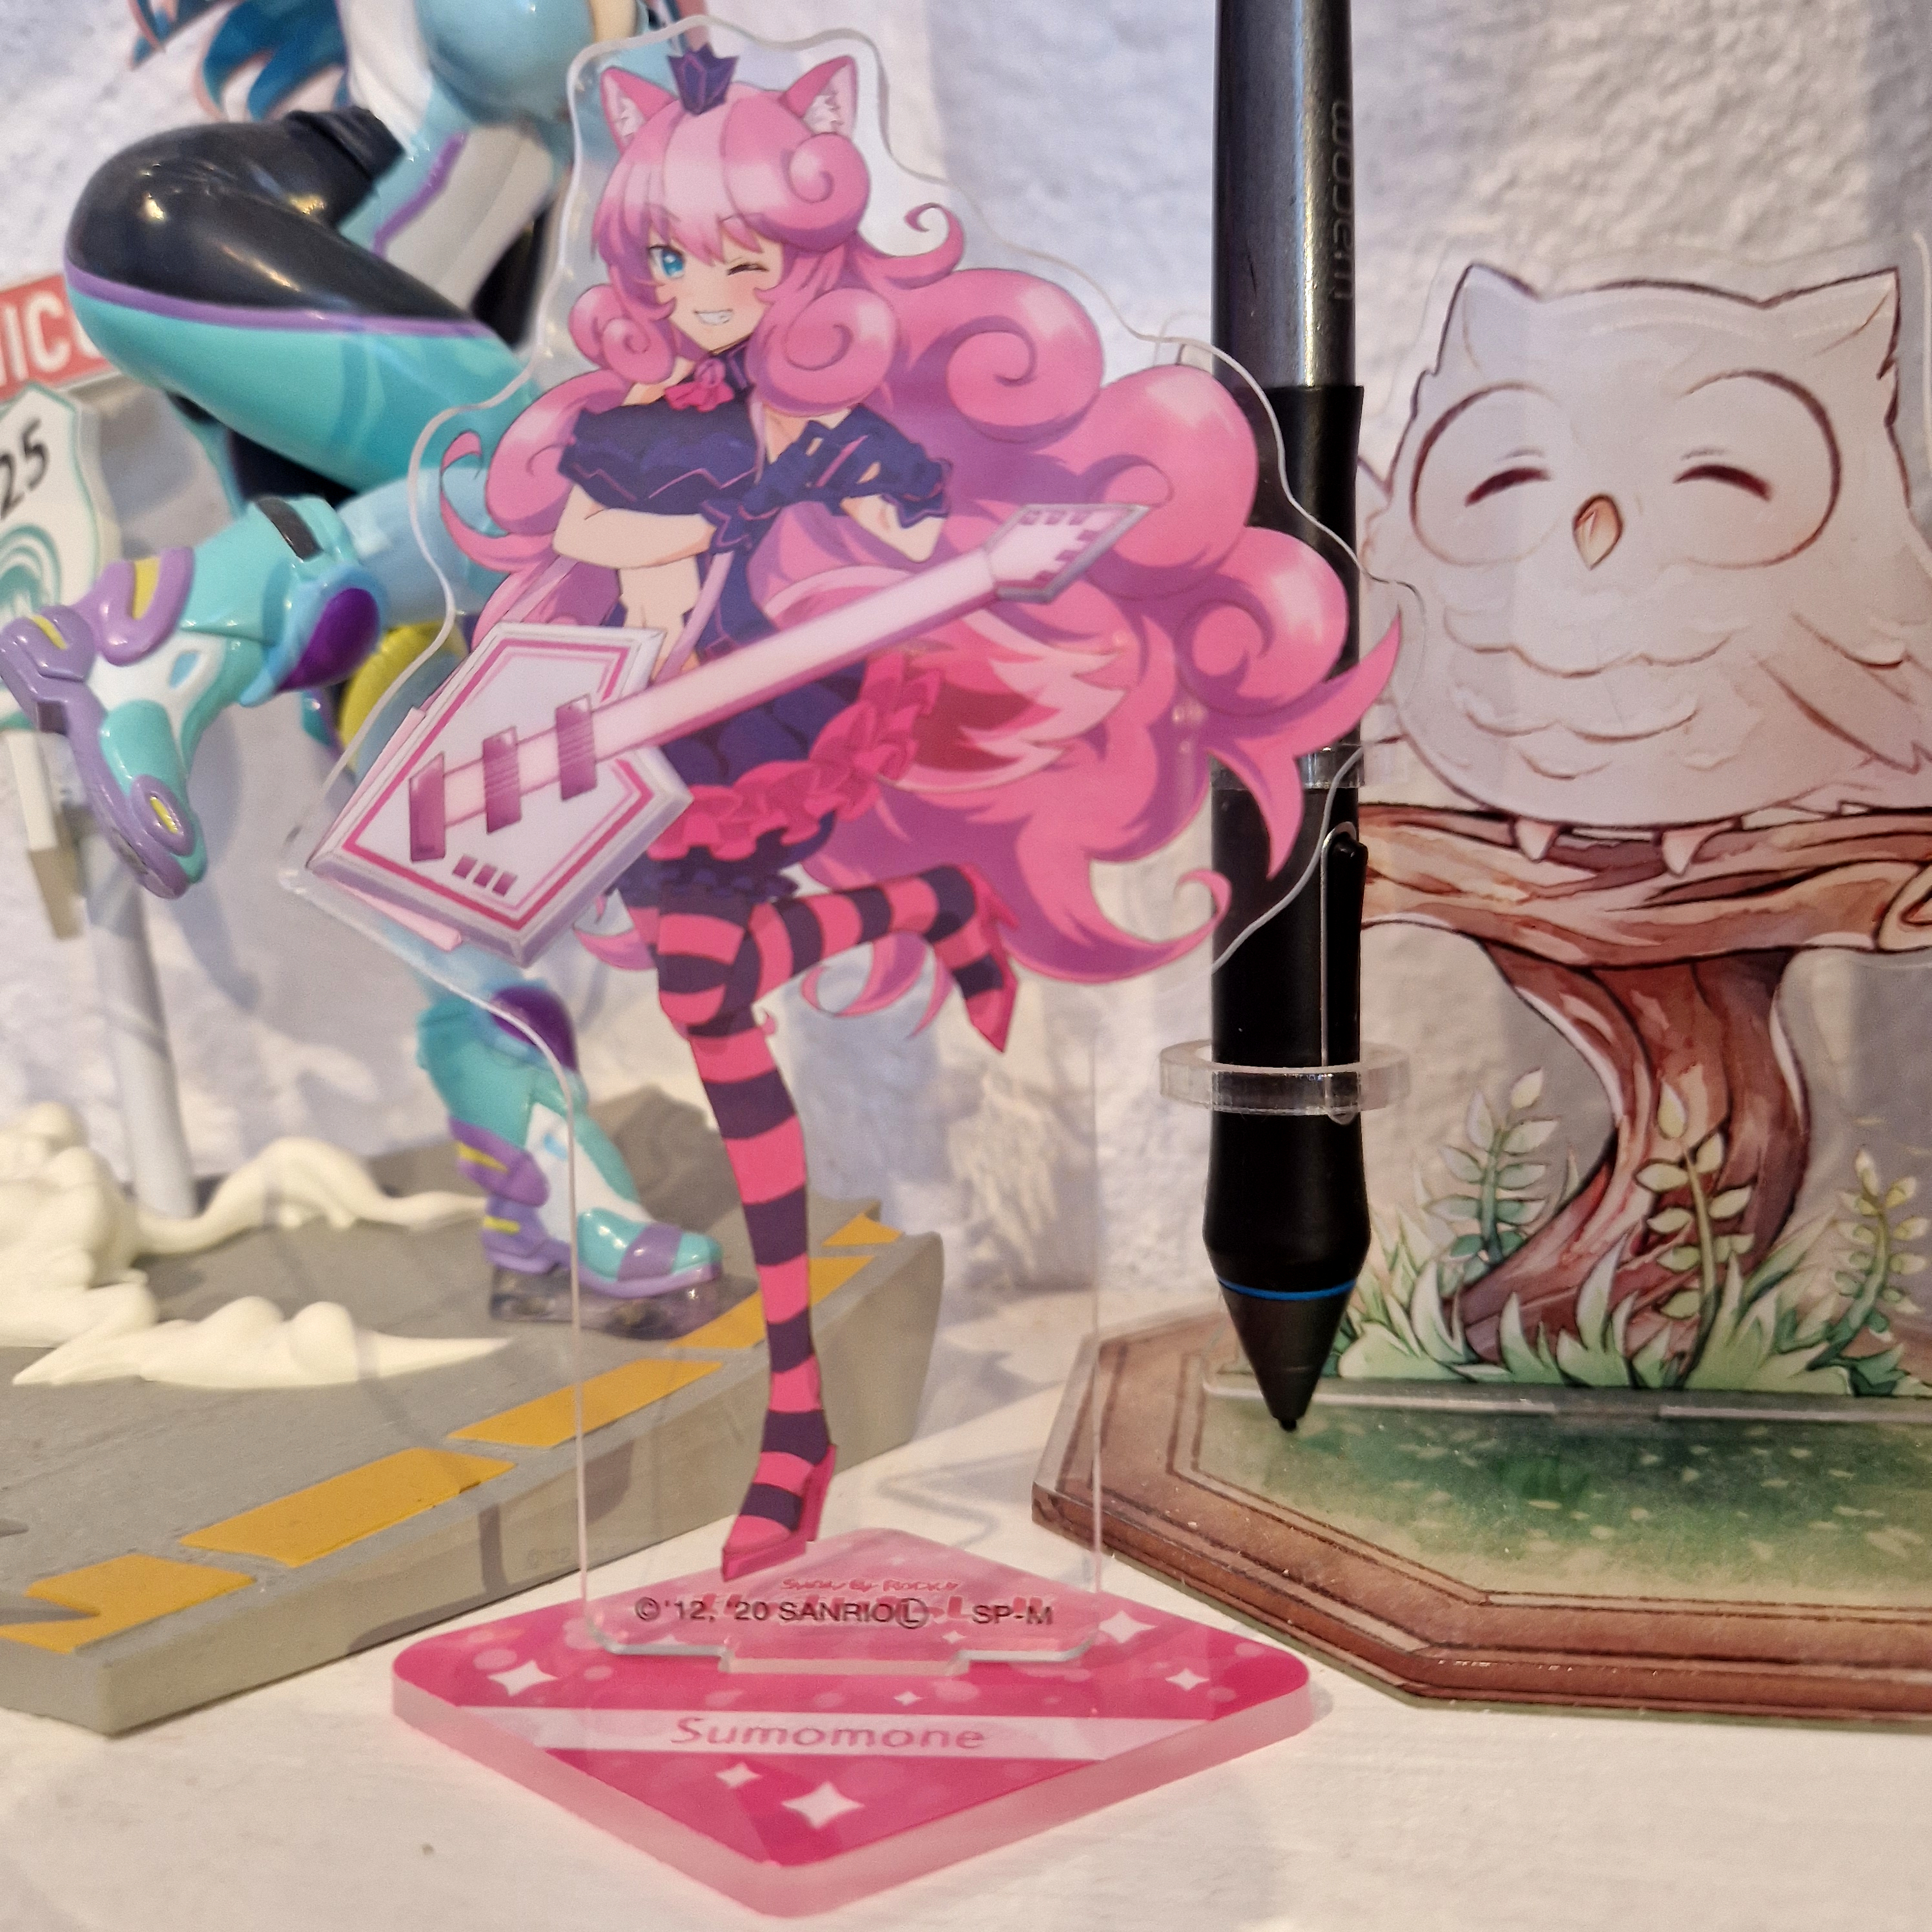 An acrylic stand of Sumomone from Show By Rock, making a heart with her hands and winking.